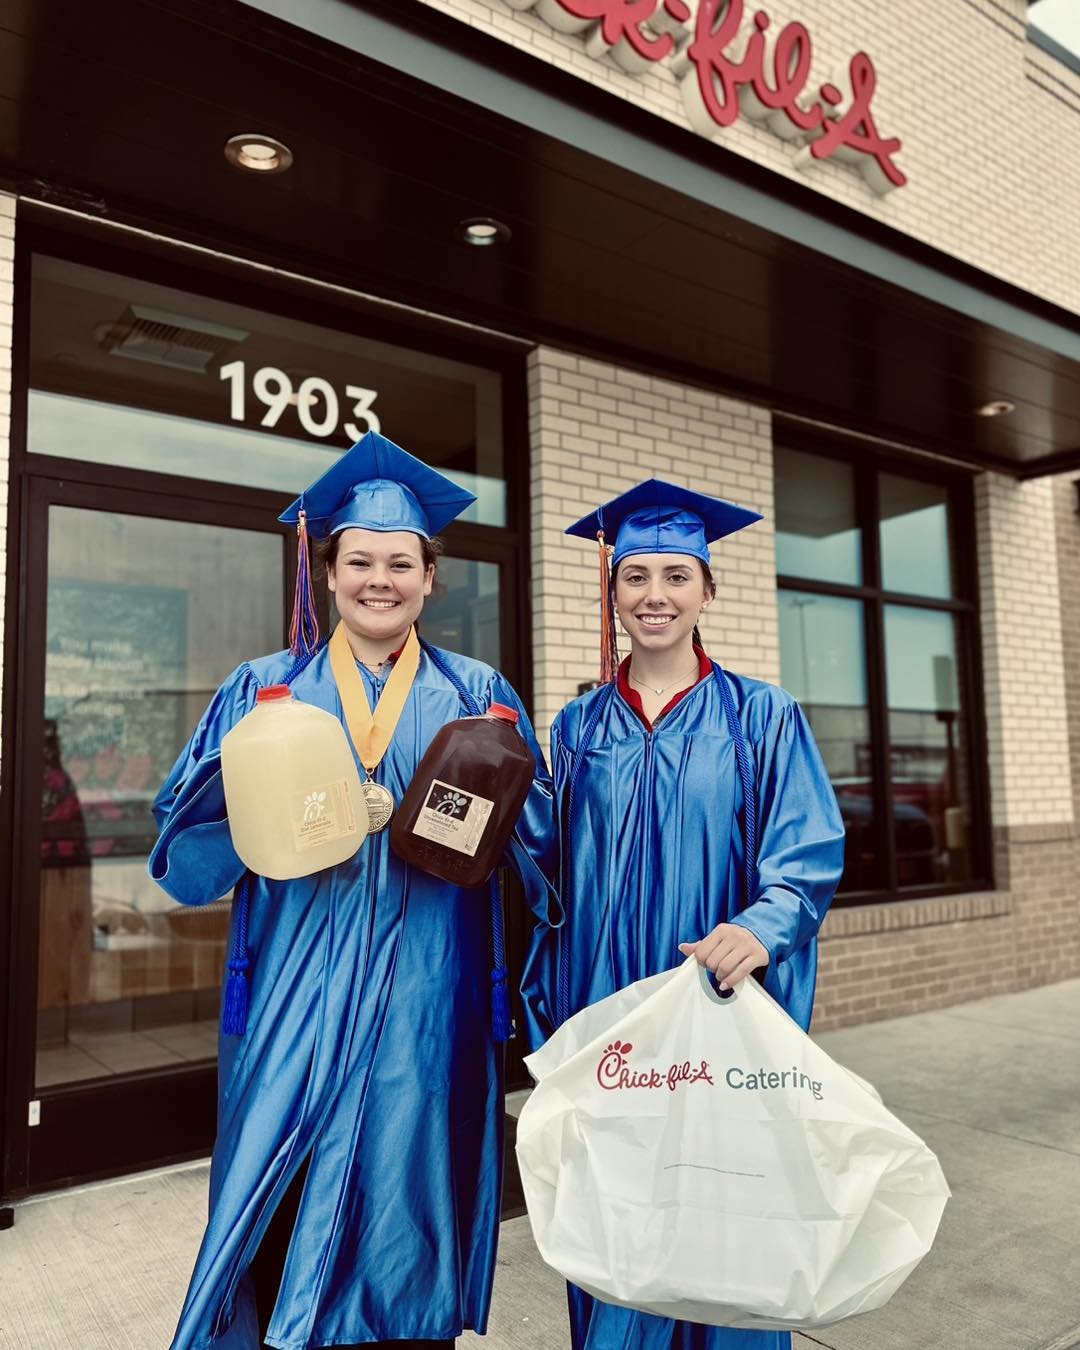 💝🎓🧑🏽&zwj;🎓Order a Medium or Large Chick-fil-A&reg; Nuggets or Chick-n-Strips&reg; Tray 
and receive a free Small Chick-fil-A&reg; Nuggets or Chick-n-Strips&reg; Tray.

Here is how to qualify:
👩🏻&zwj;💻Place your order online for both trays
✍️W